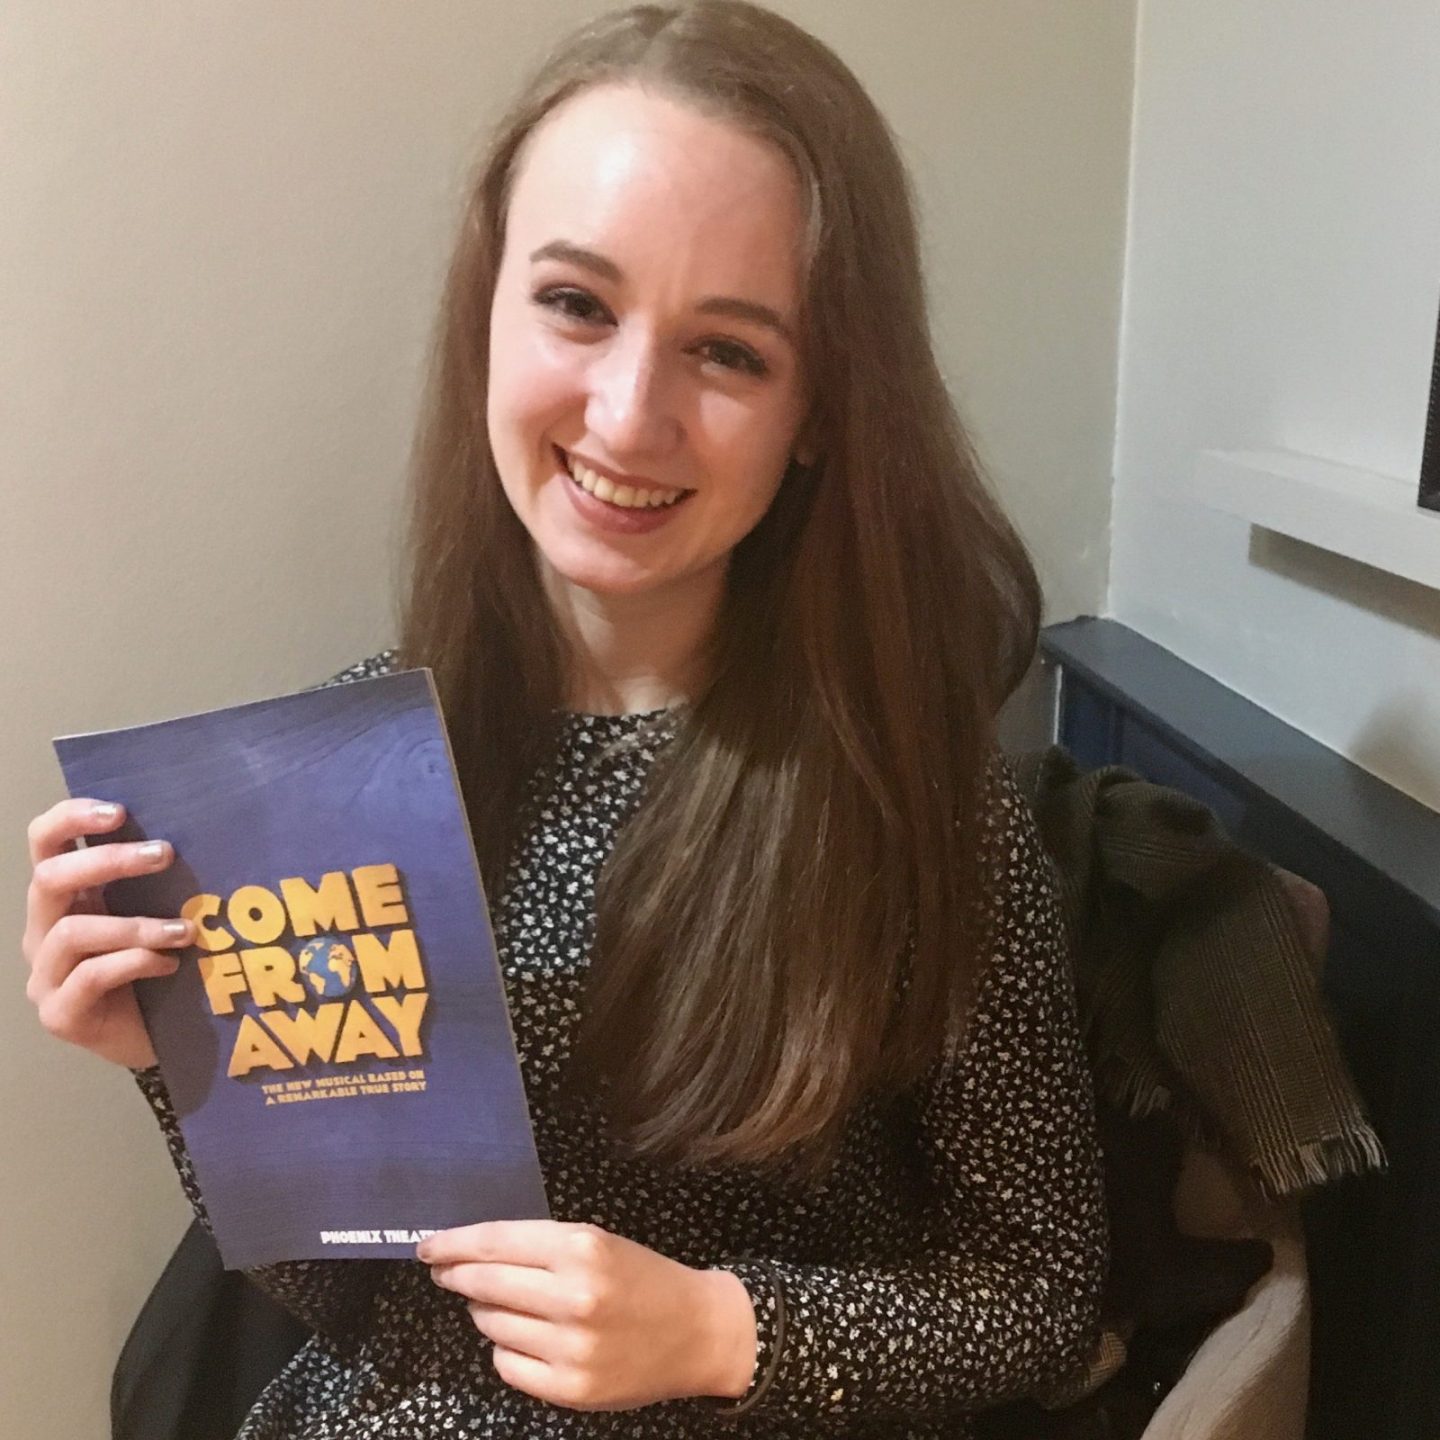 pippa sat on chair, holding up blue come from away programme and smiling